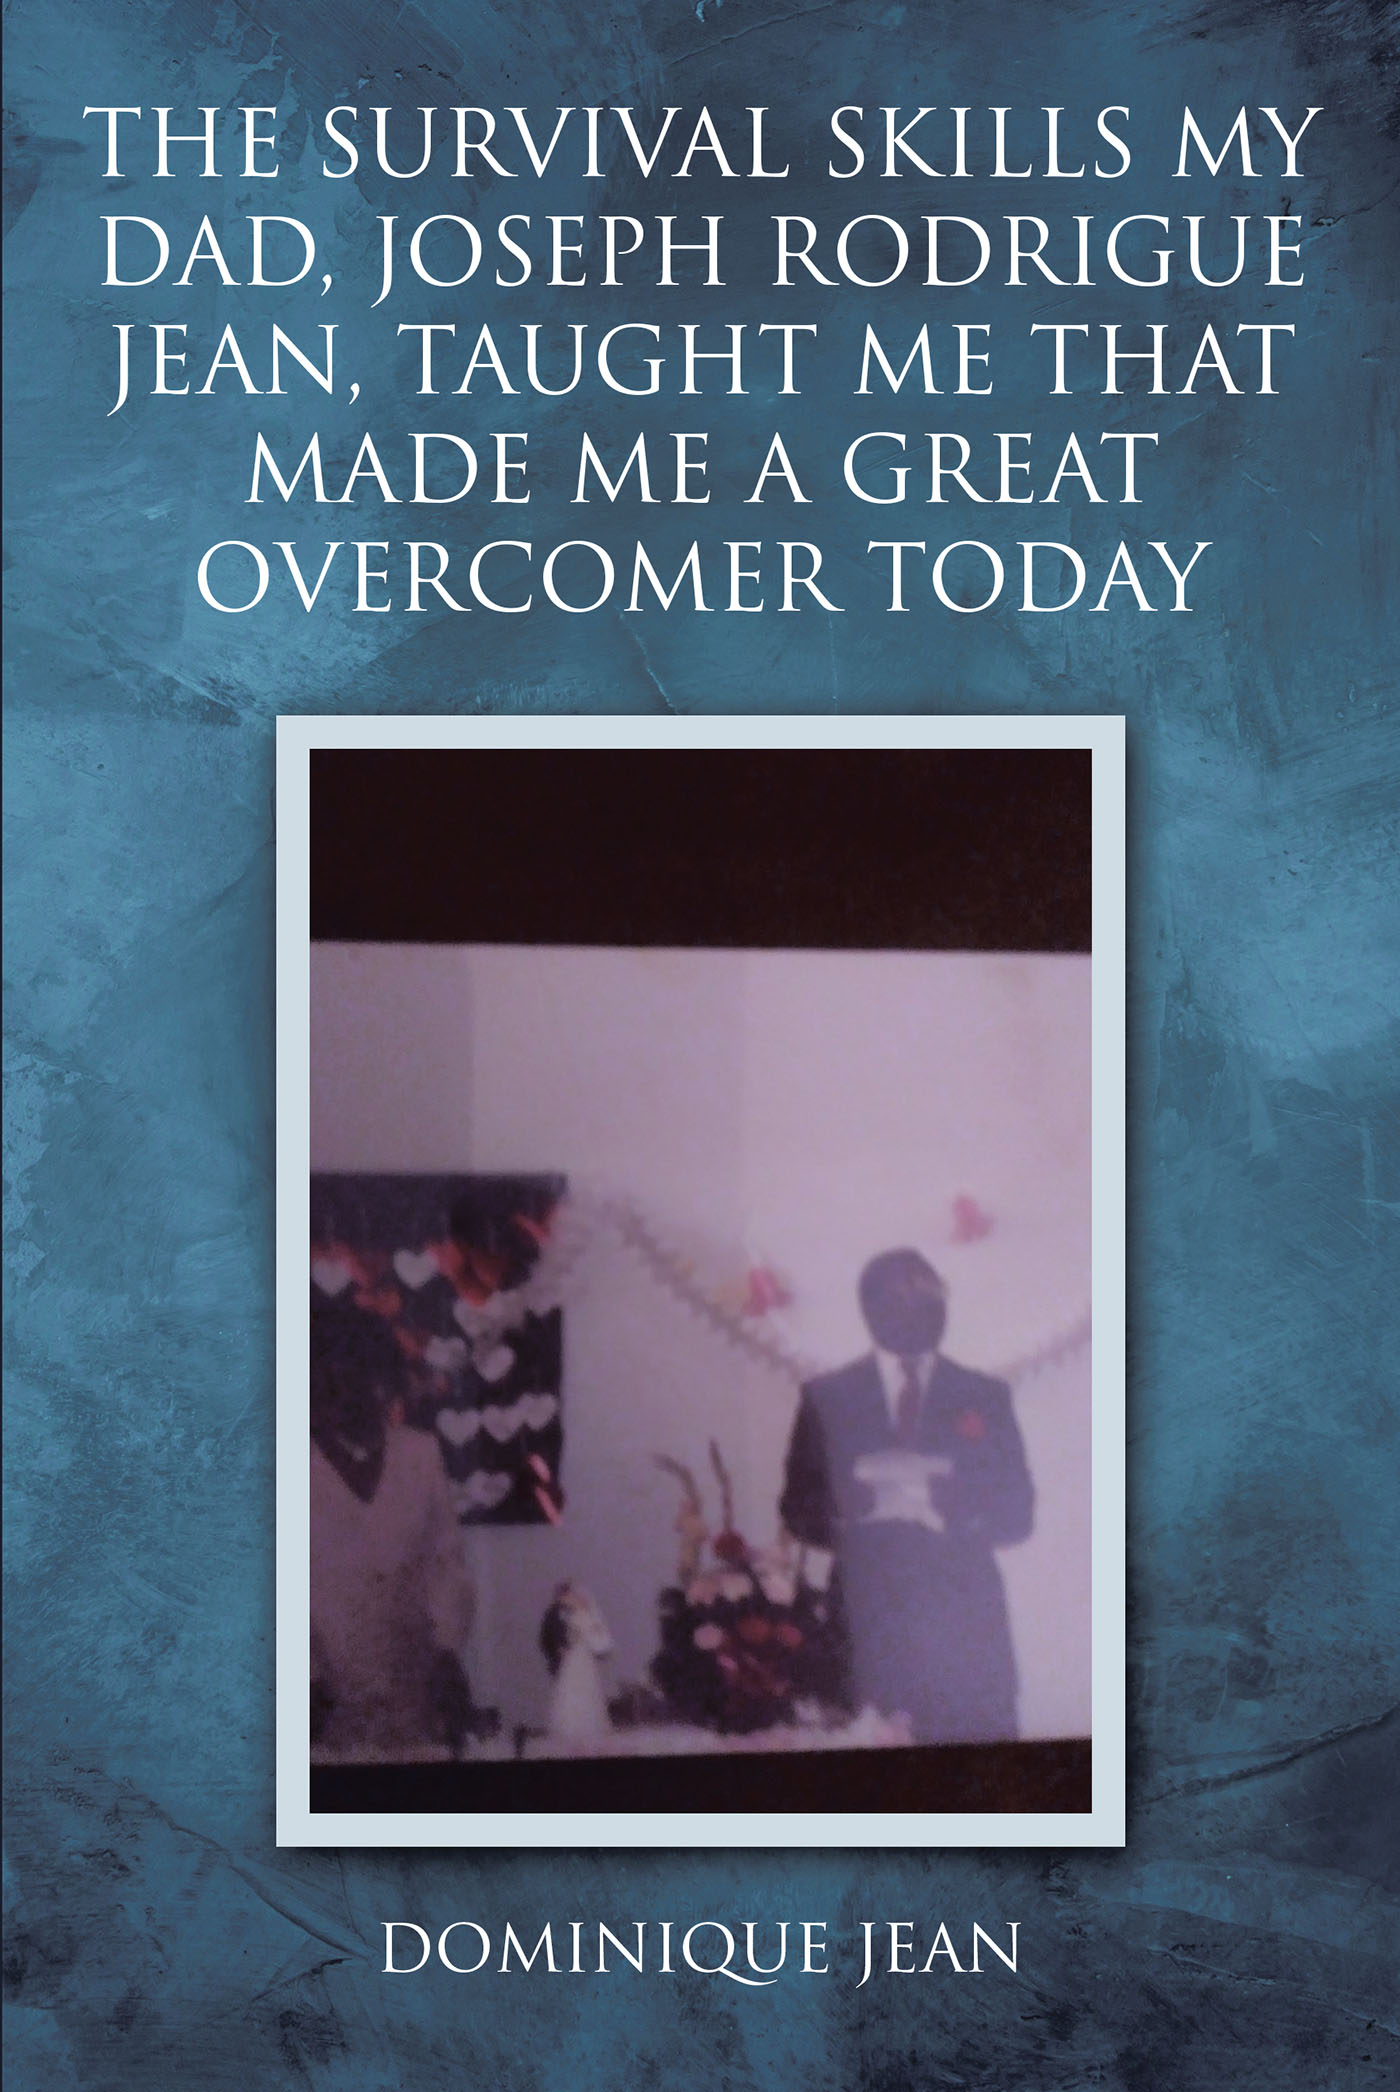 Dominique Jean’s Newly Released “The Survival Skills My Dad, Joseph Rodrigue Jean, Taught Me That Made Me A Great Overcomer Today” is an Engaging Memoir